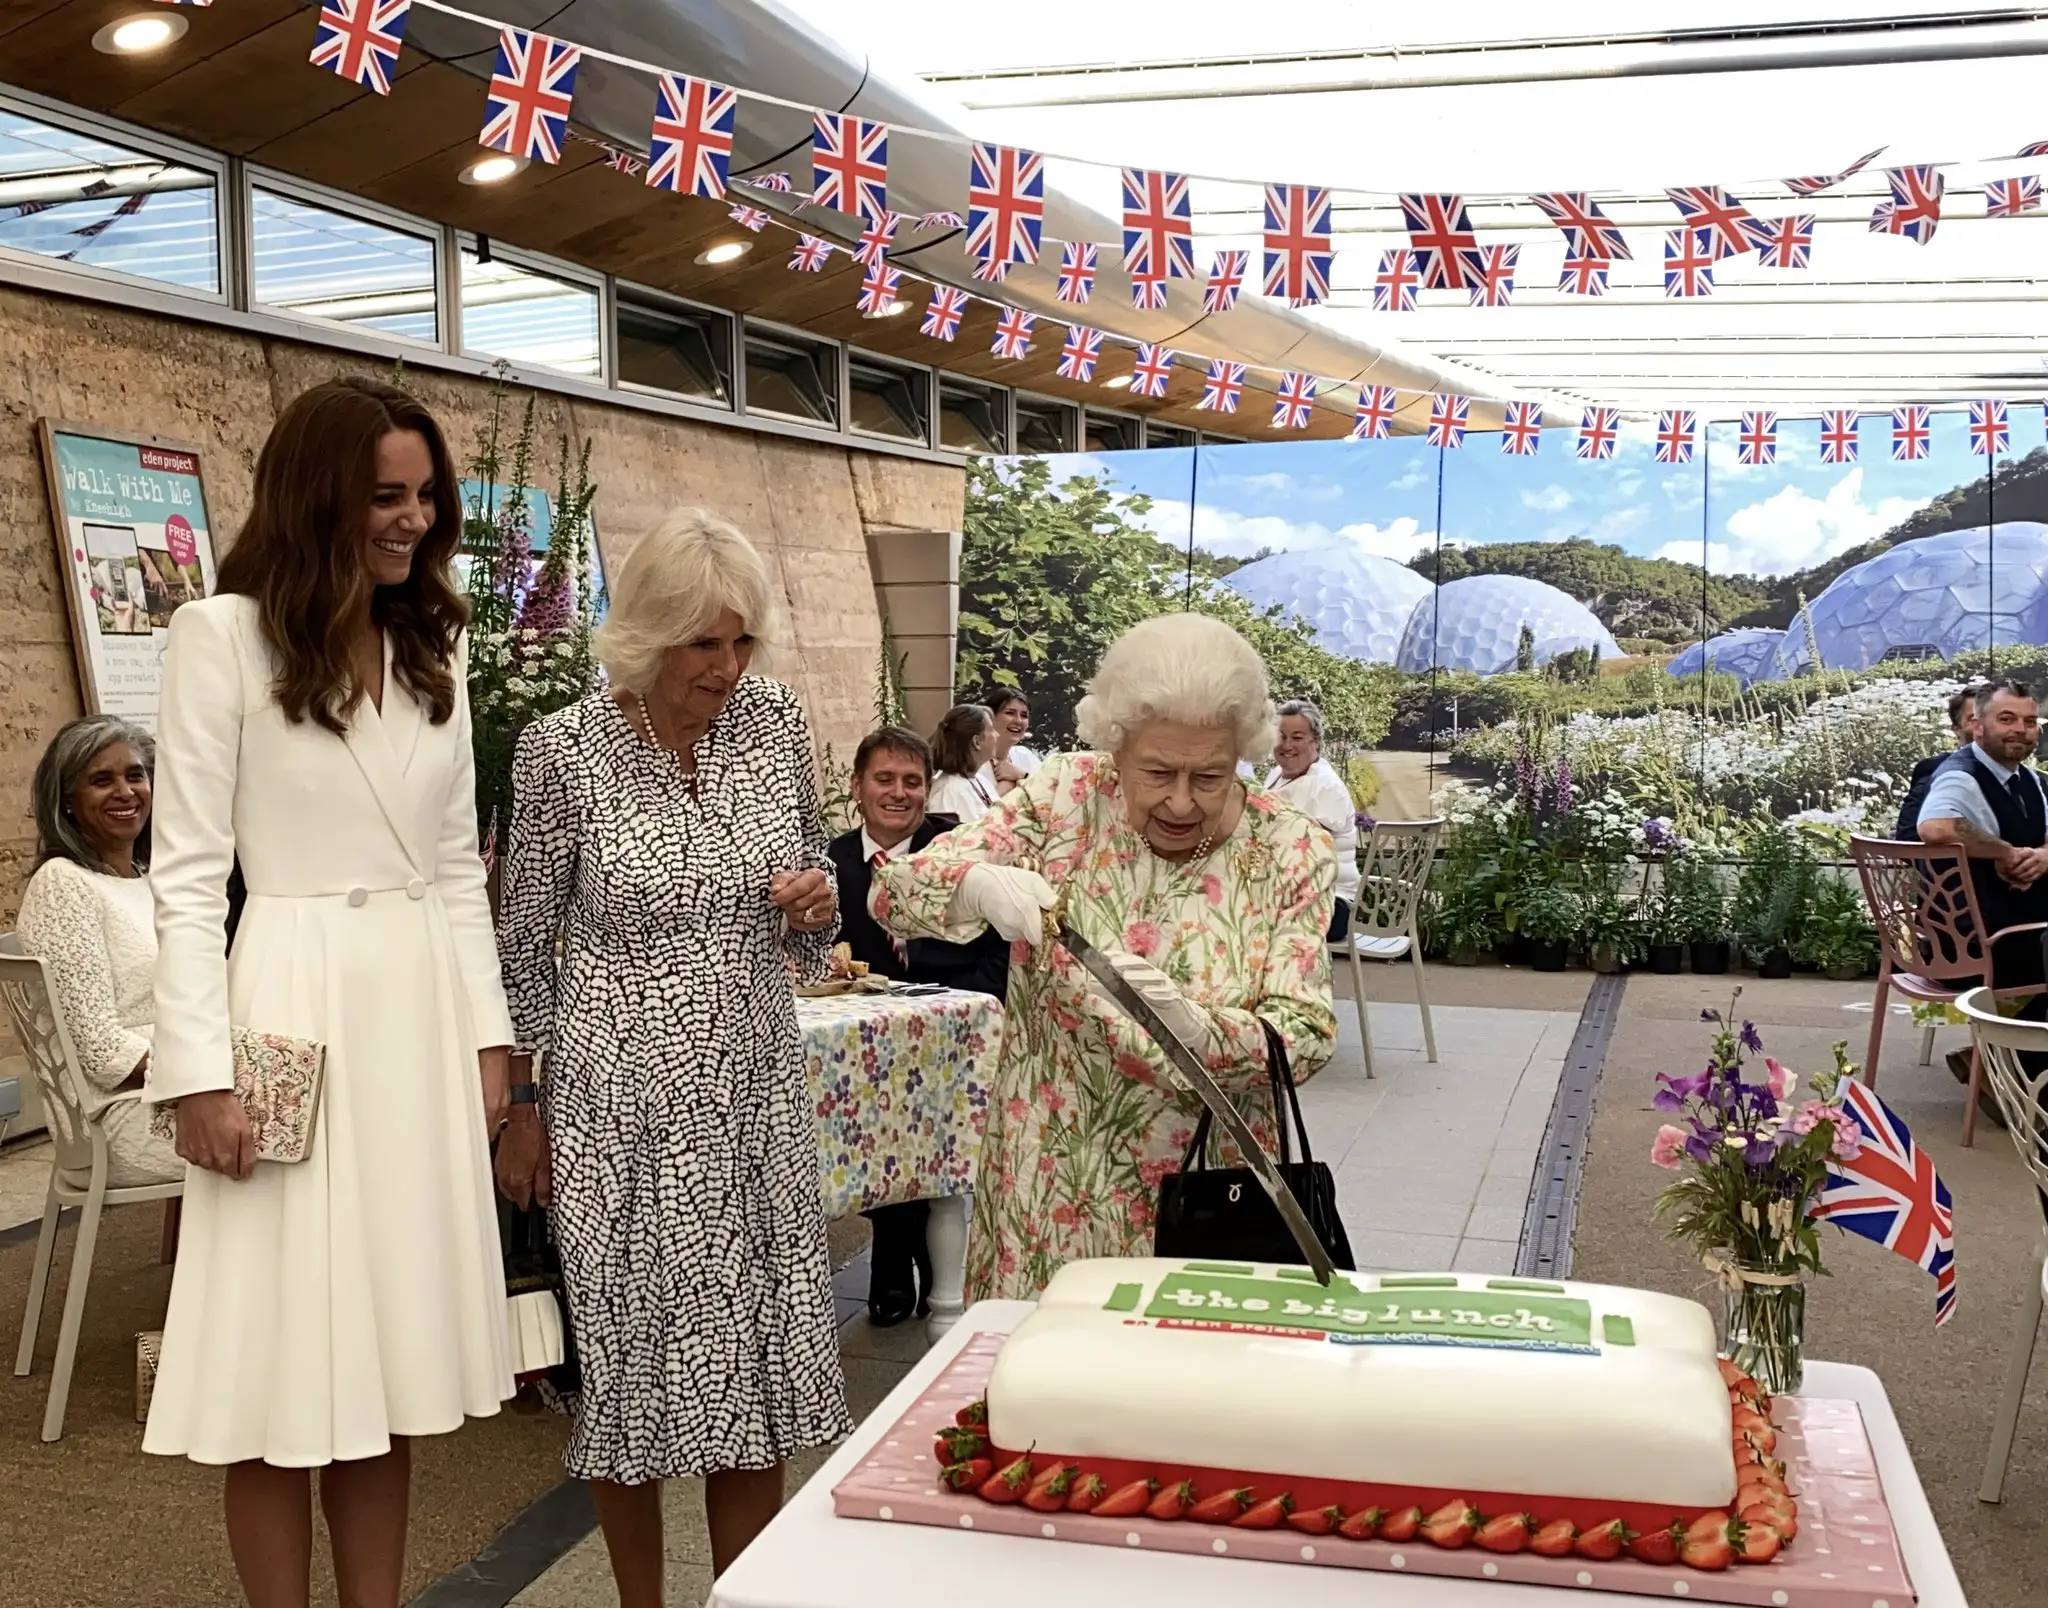 After the reception, The Duchess of Cambridge also joined Her Majesty and The Duchess of Cornwall to meet with the volunteers of the Big Lunch charity